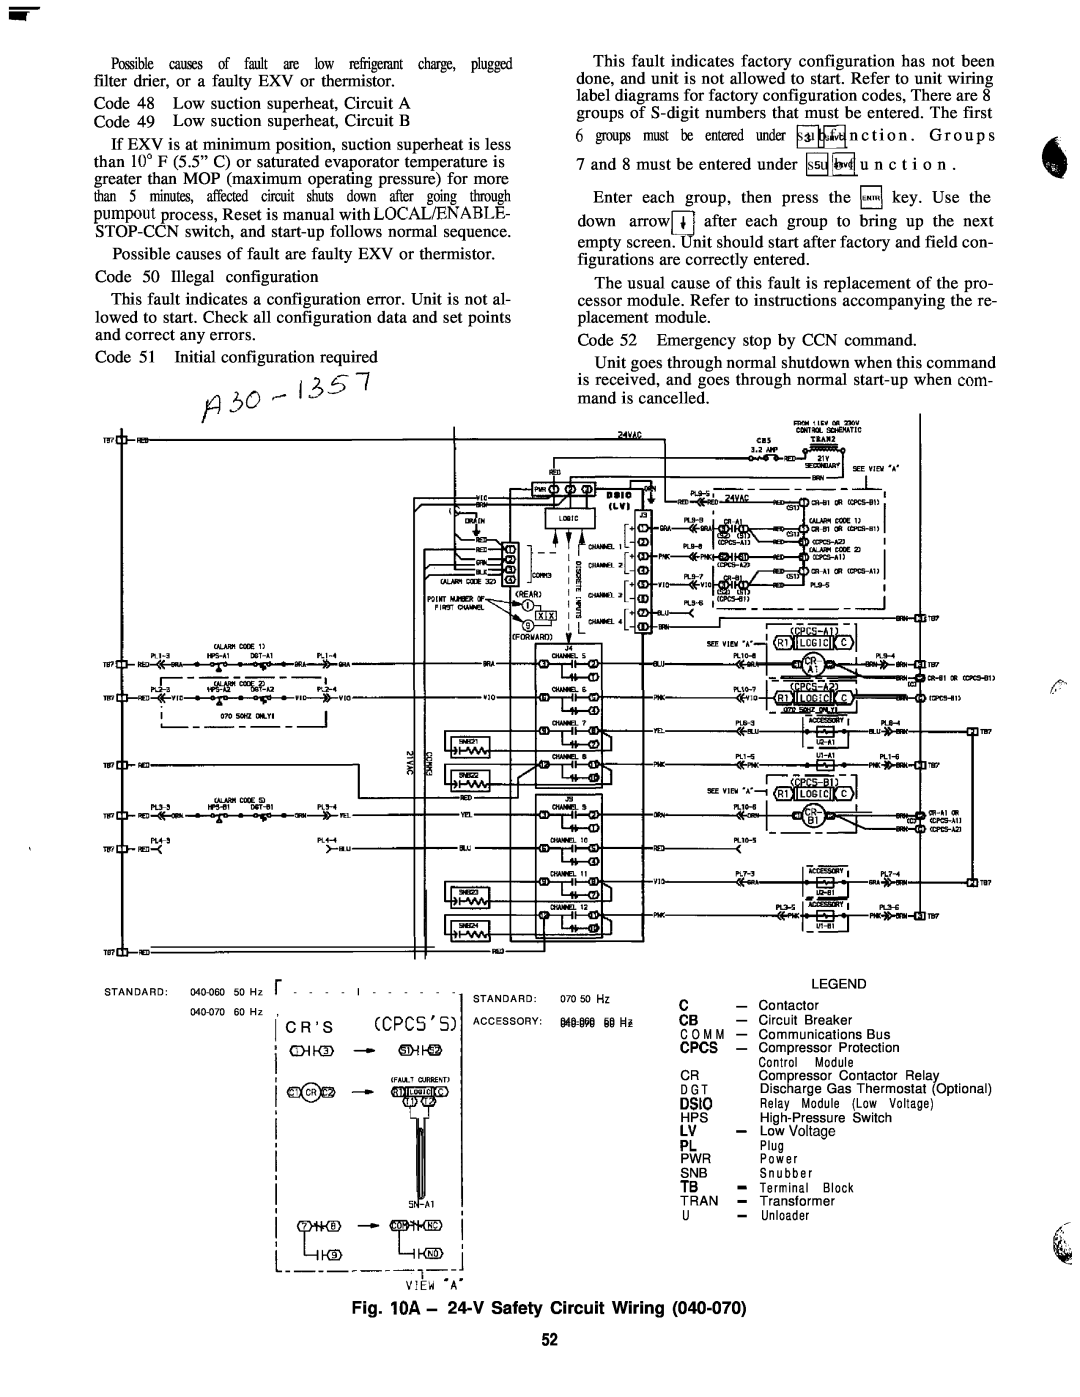 Carrier 040-420 specifications i2G7, Cpcs, ’ Sl, C R ’ S, Fig. IOA - 24-VSafety Circuit Wiring 